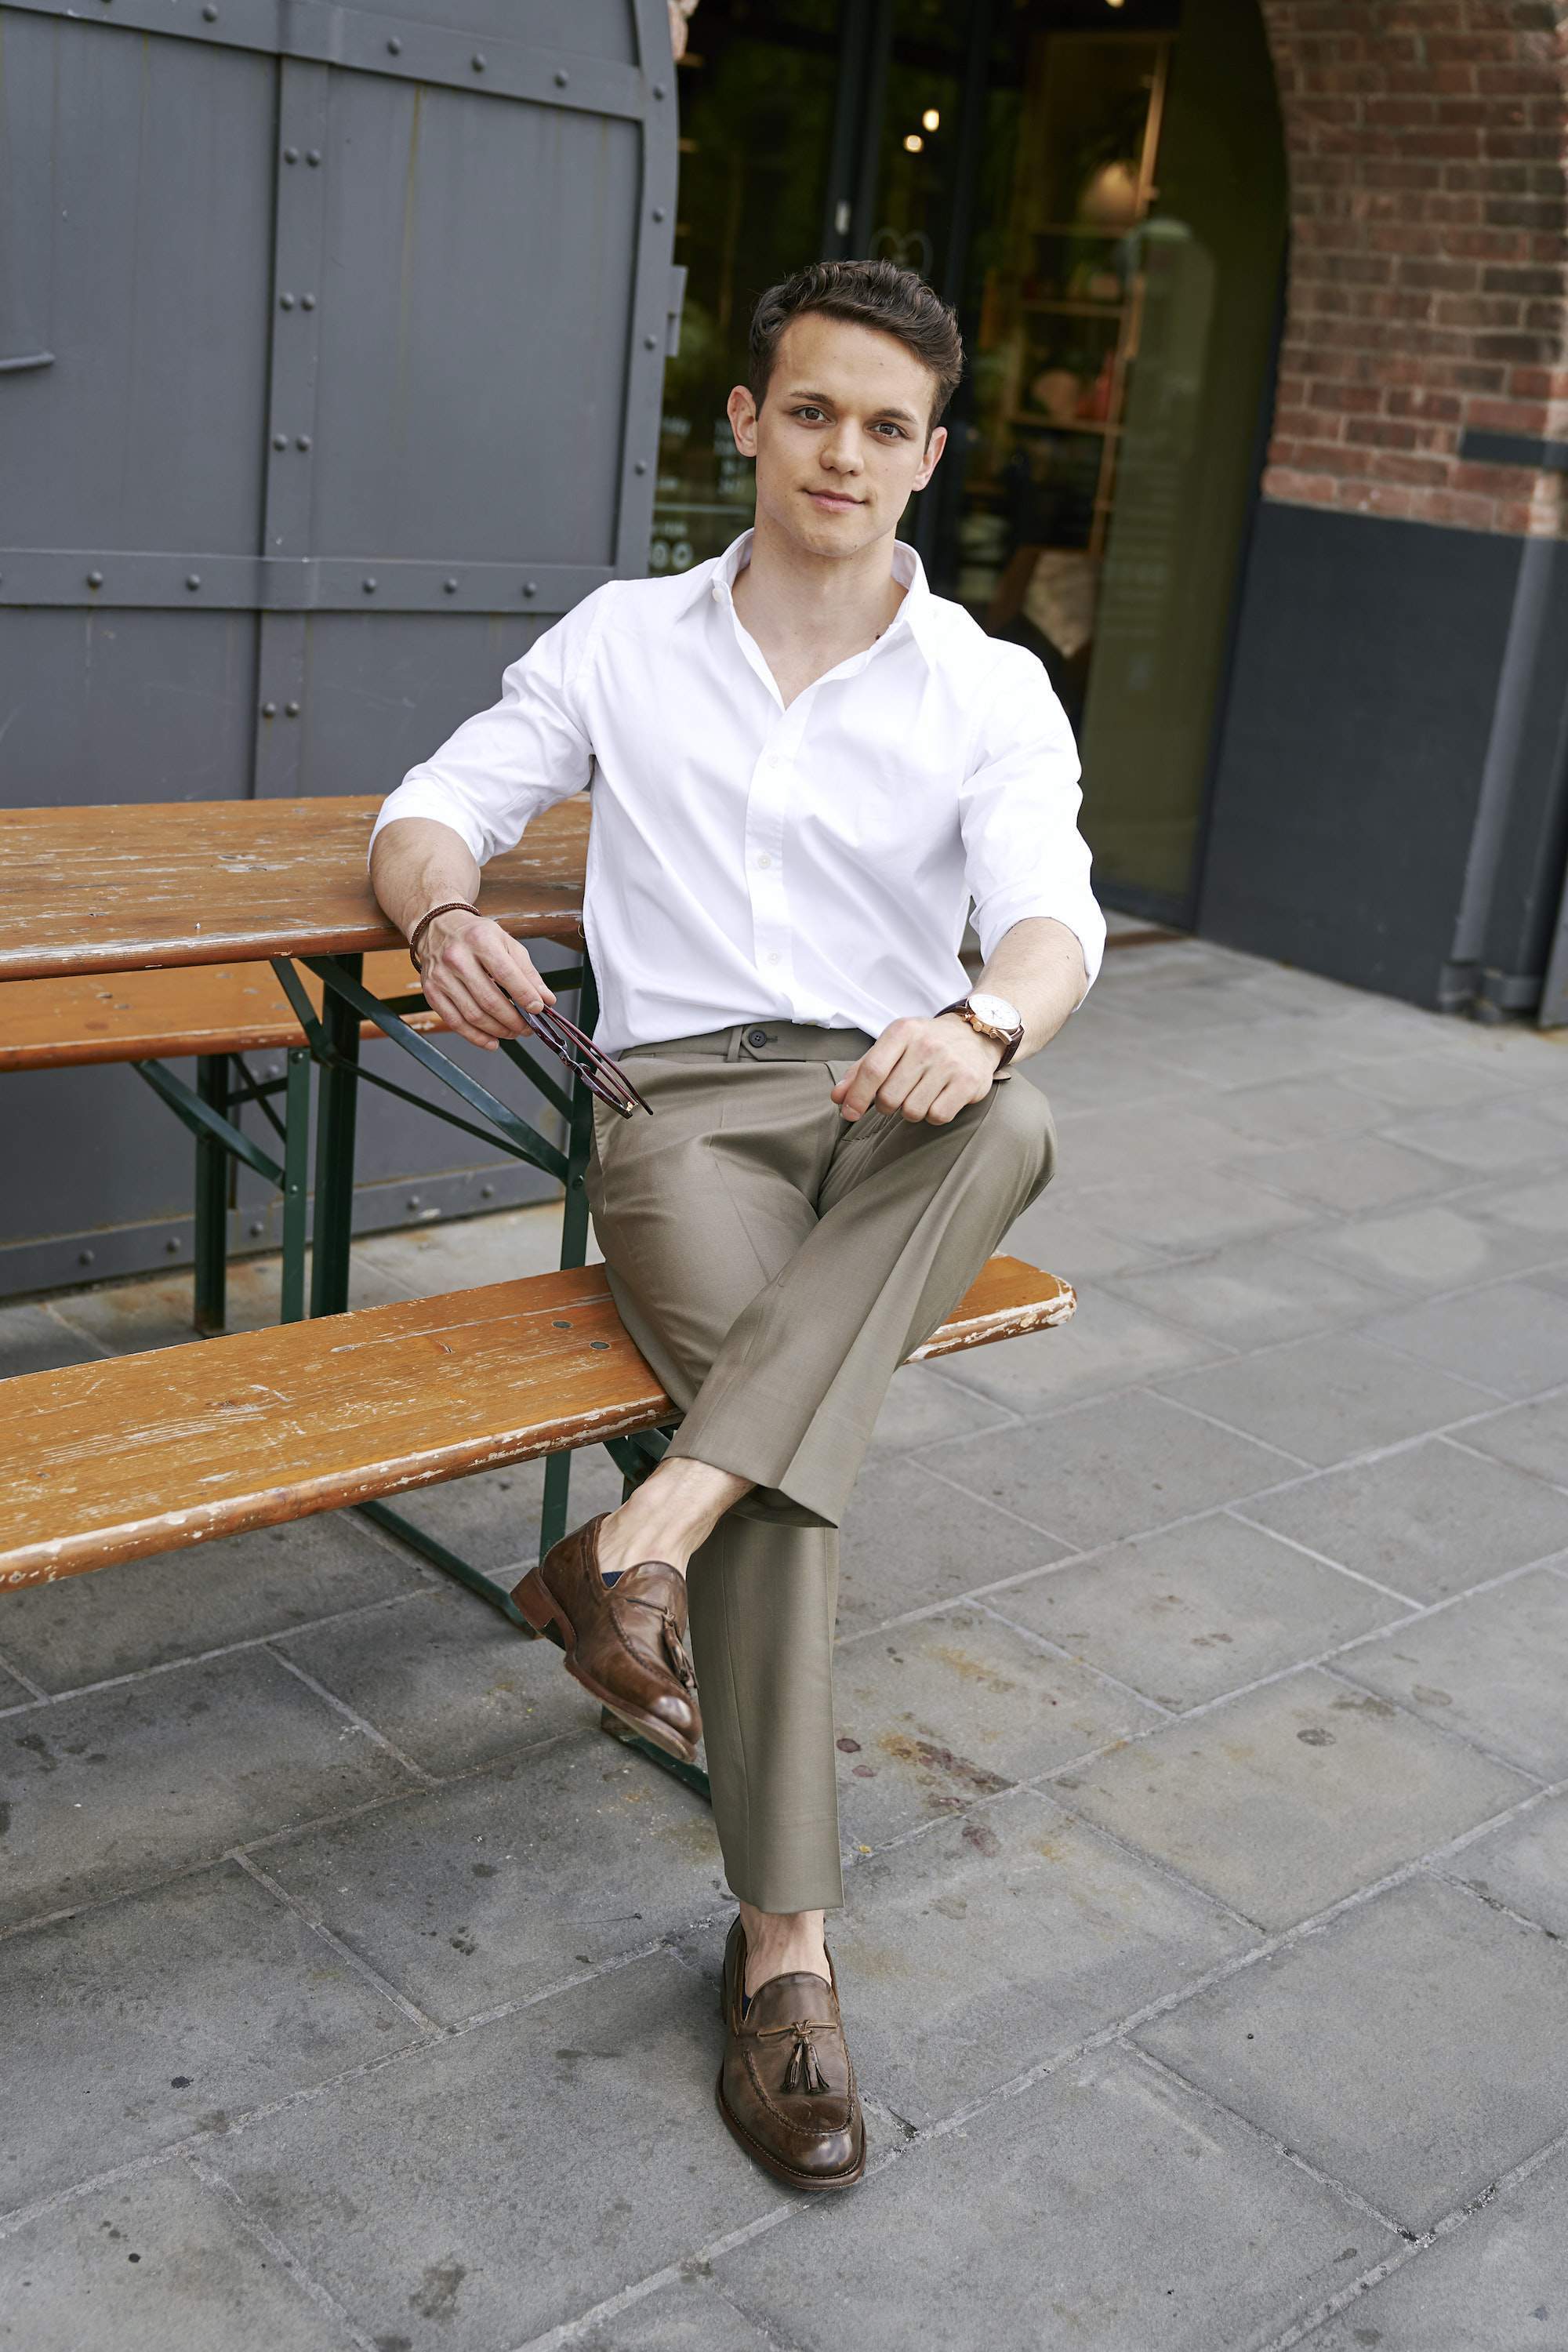 Free Photos - A Well-dressed Young Boy Wearing A White Shirt And Brown Pants.  He Is Posing For A Photo, Showcasing His Outfit And Looking Confident. The  Boy Appears To Be The